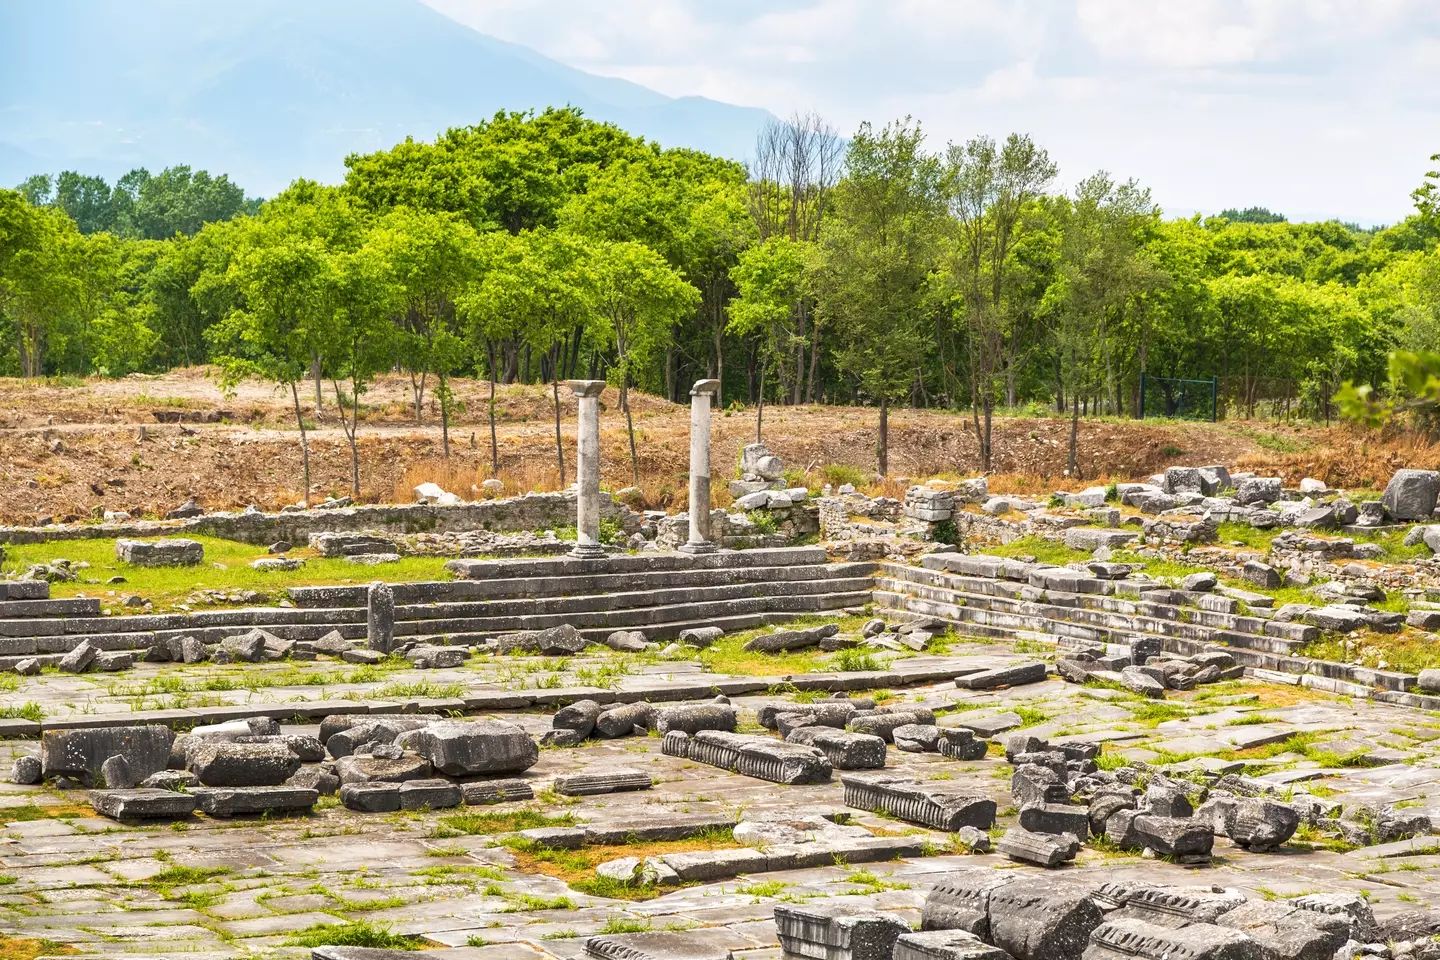 The dig took place near the ancient city of Philippi.